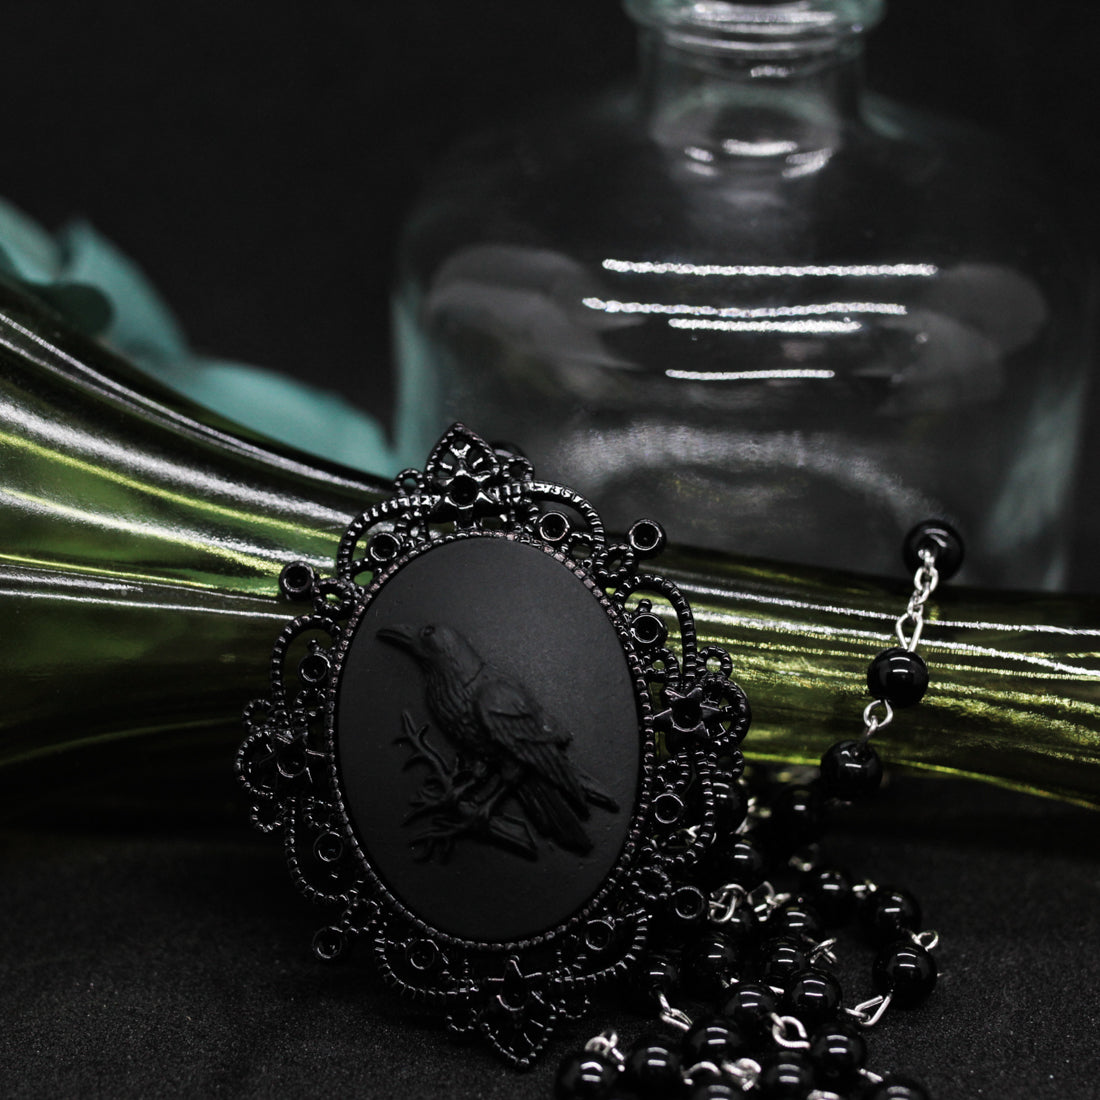 Raven Cameo Rosary Necklace